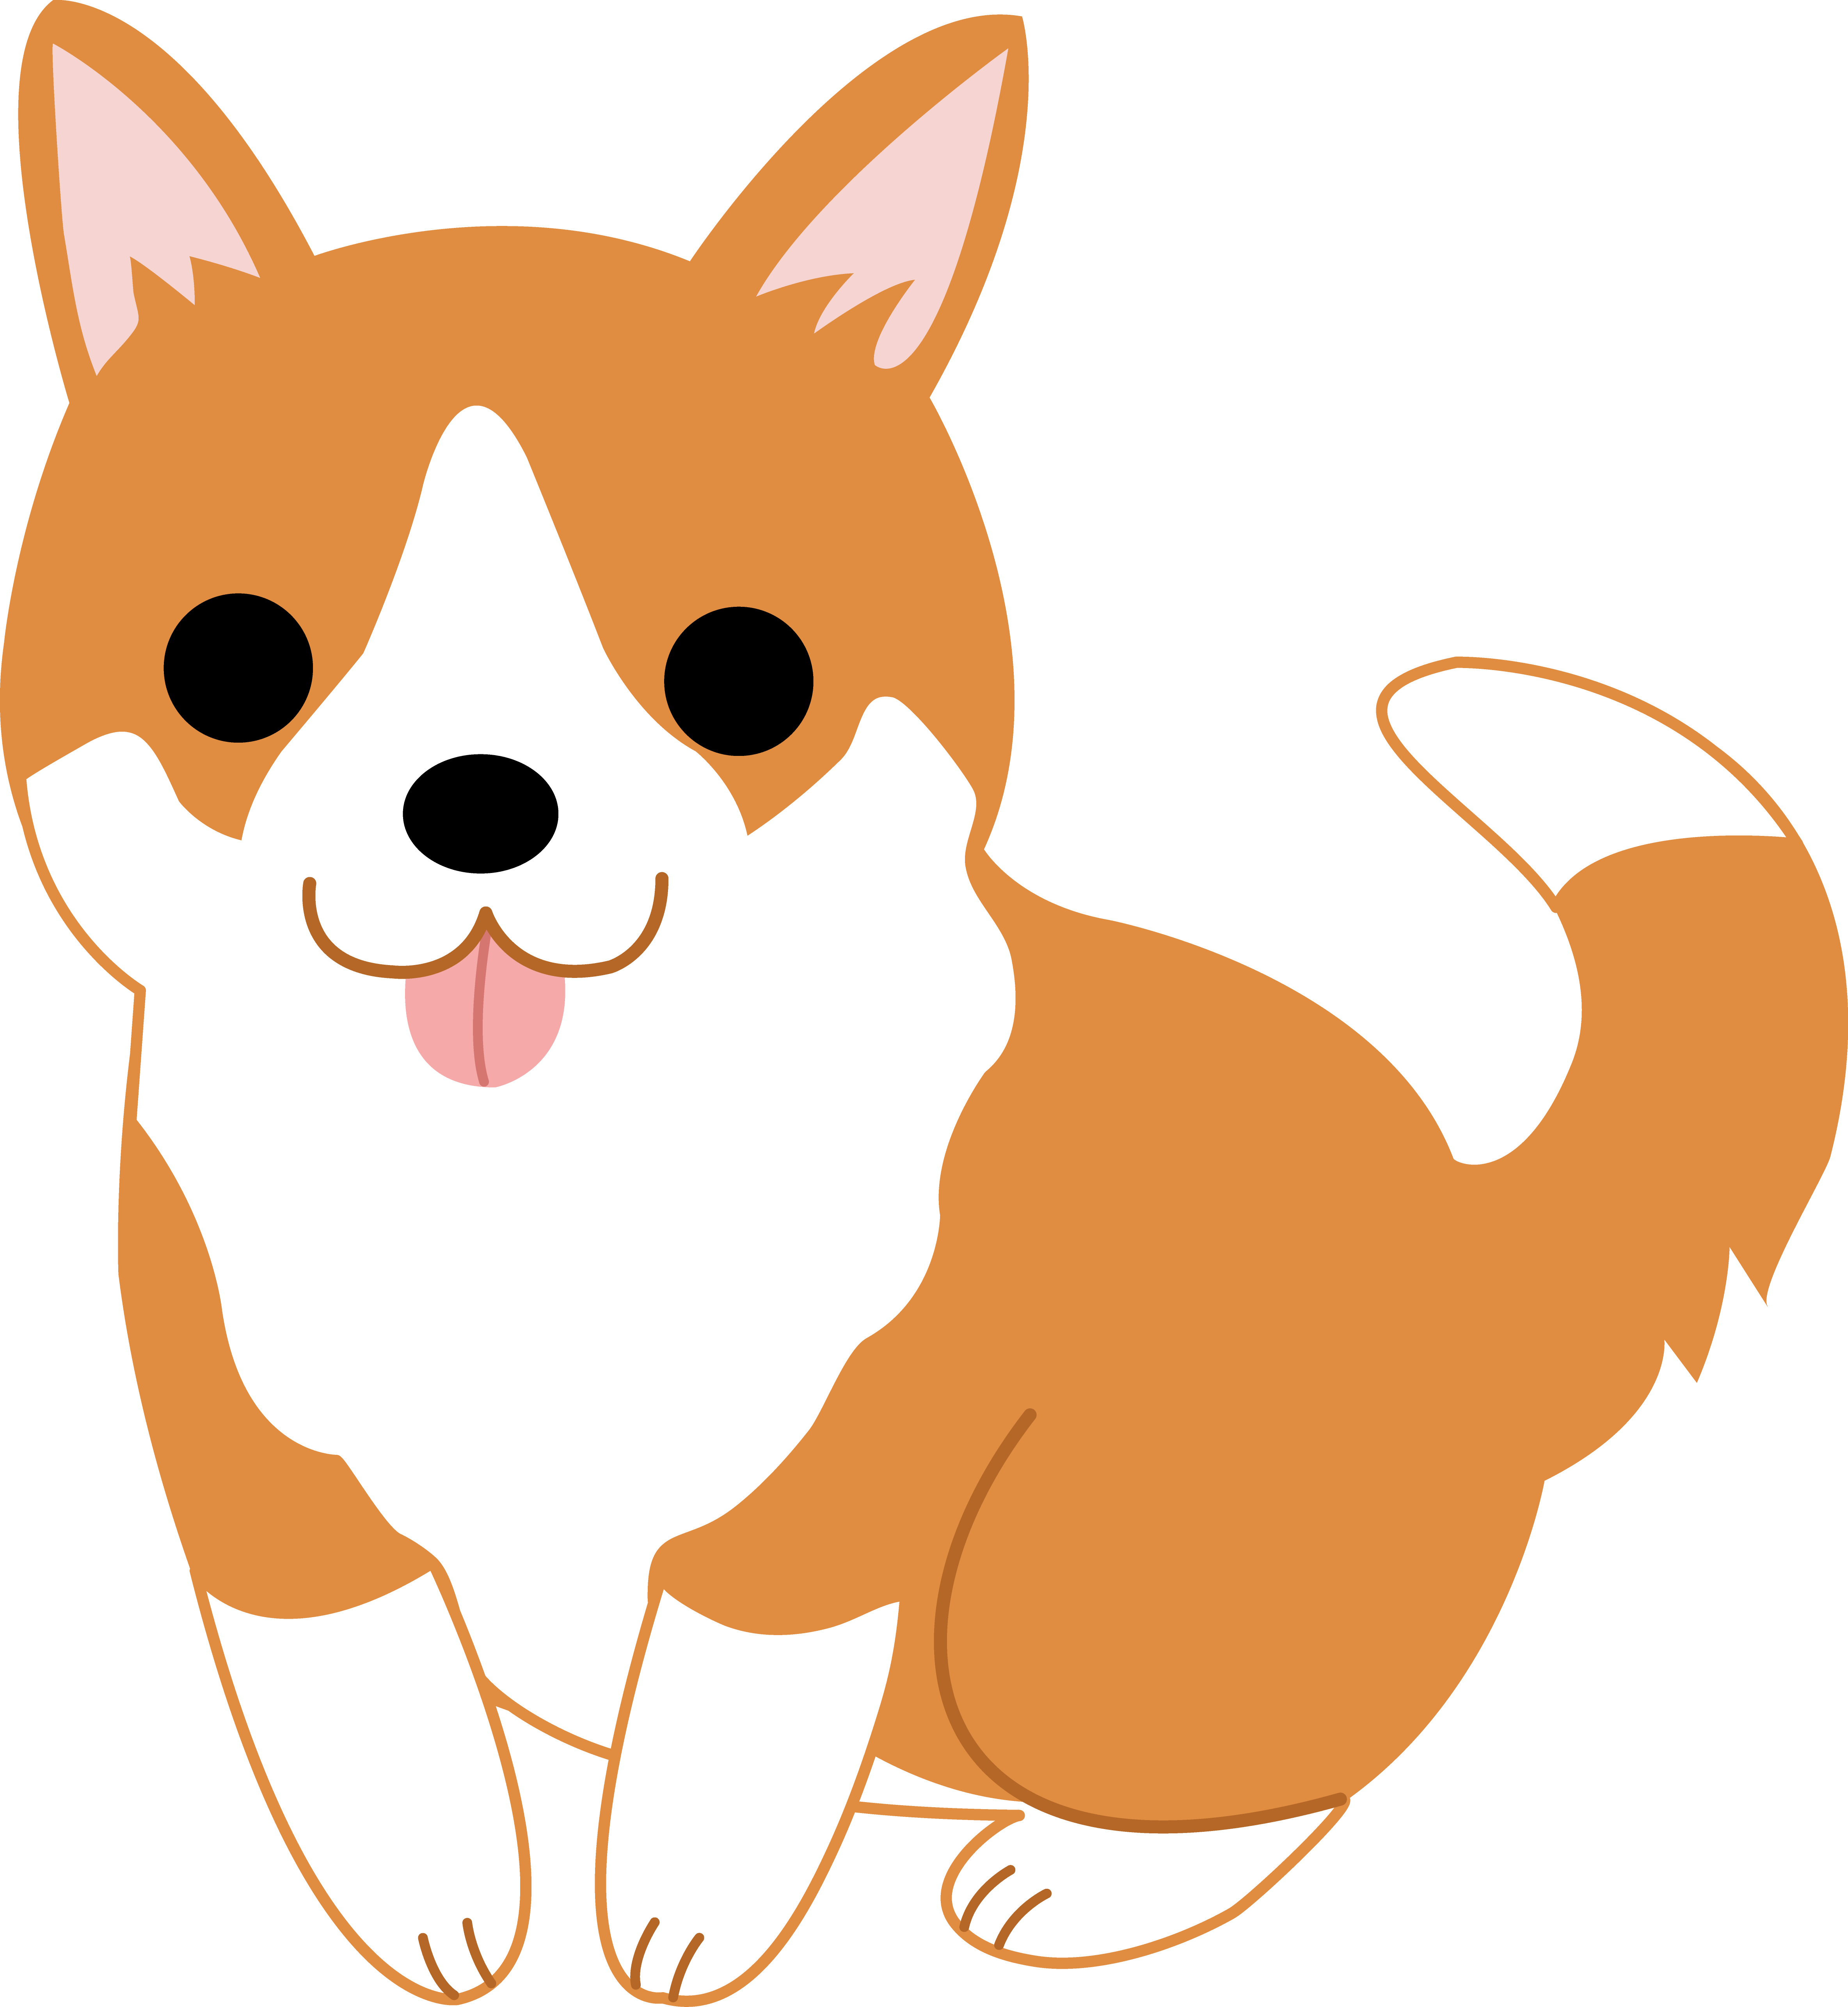 Images Of Cute Corgi Puppy Clip Art Wallpaper - Animal Photo and ...